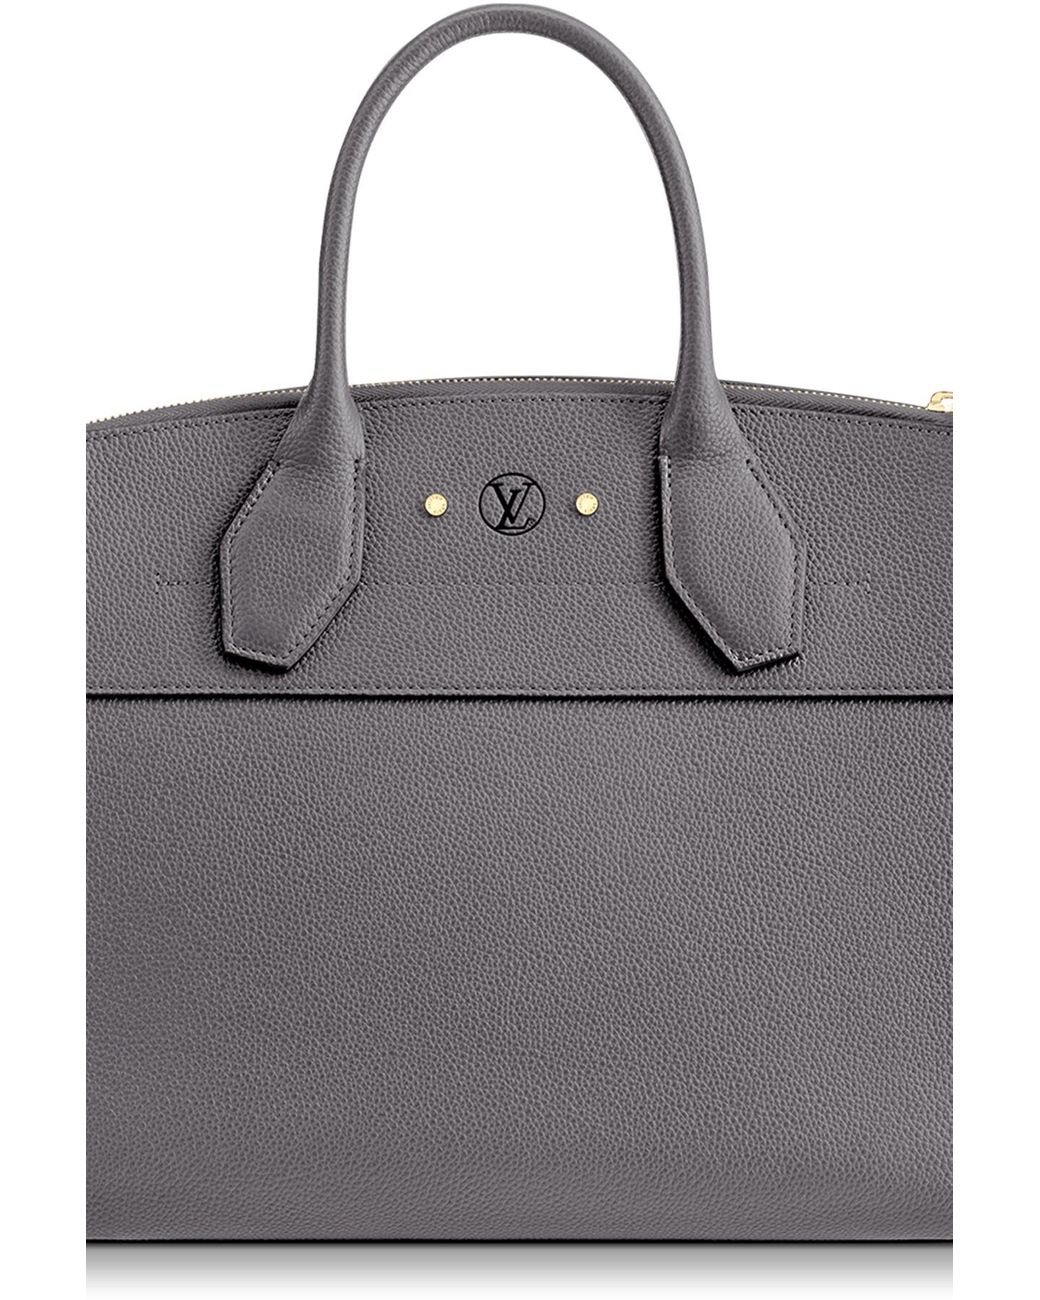 LOUIS VUITTON 'City Steamer MM' Bag in Tricolor Smooth Leather